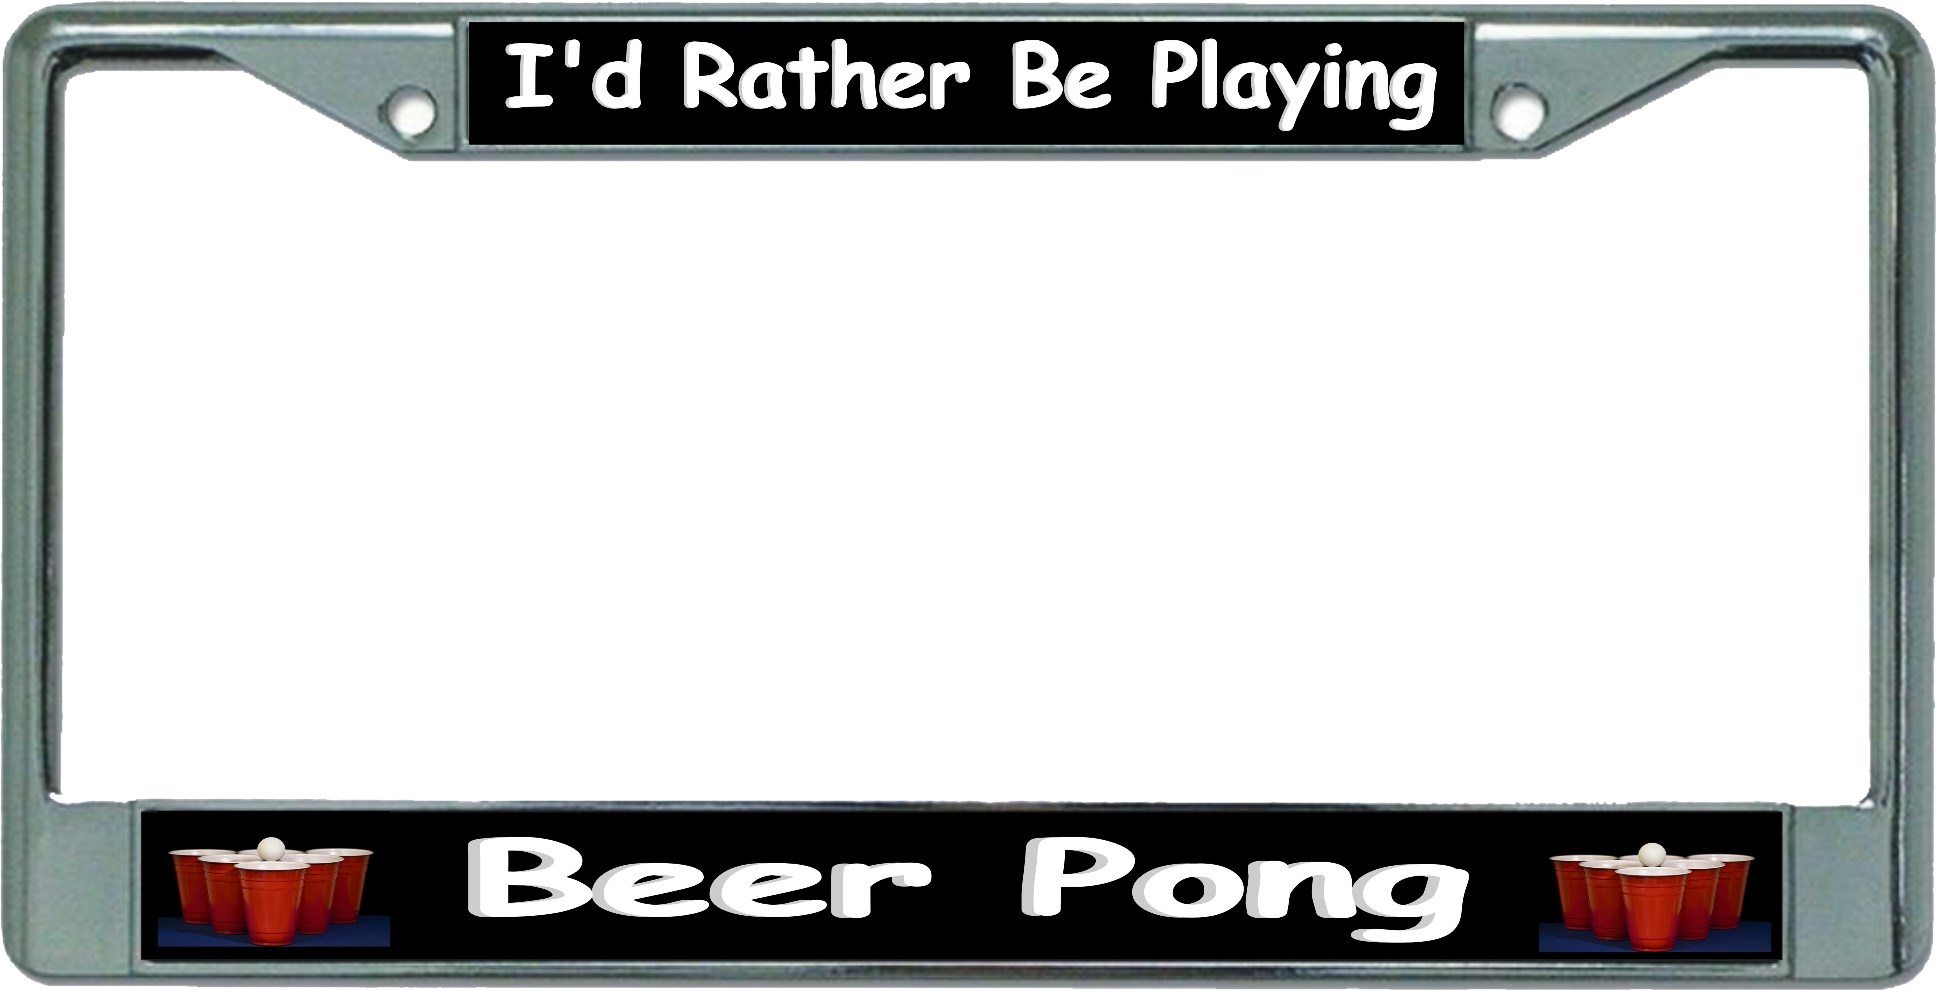 I'd Rather Be Playing Beer Pong Chrome License Plate FRAME